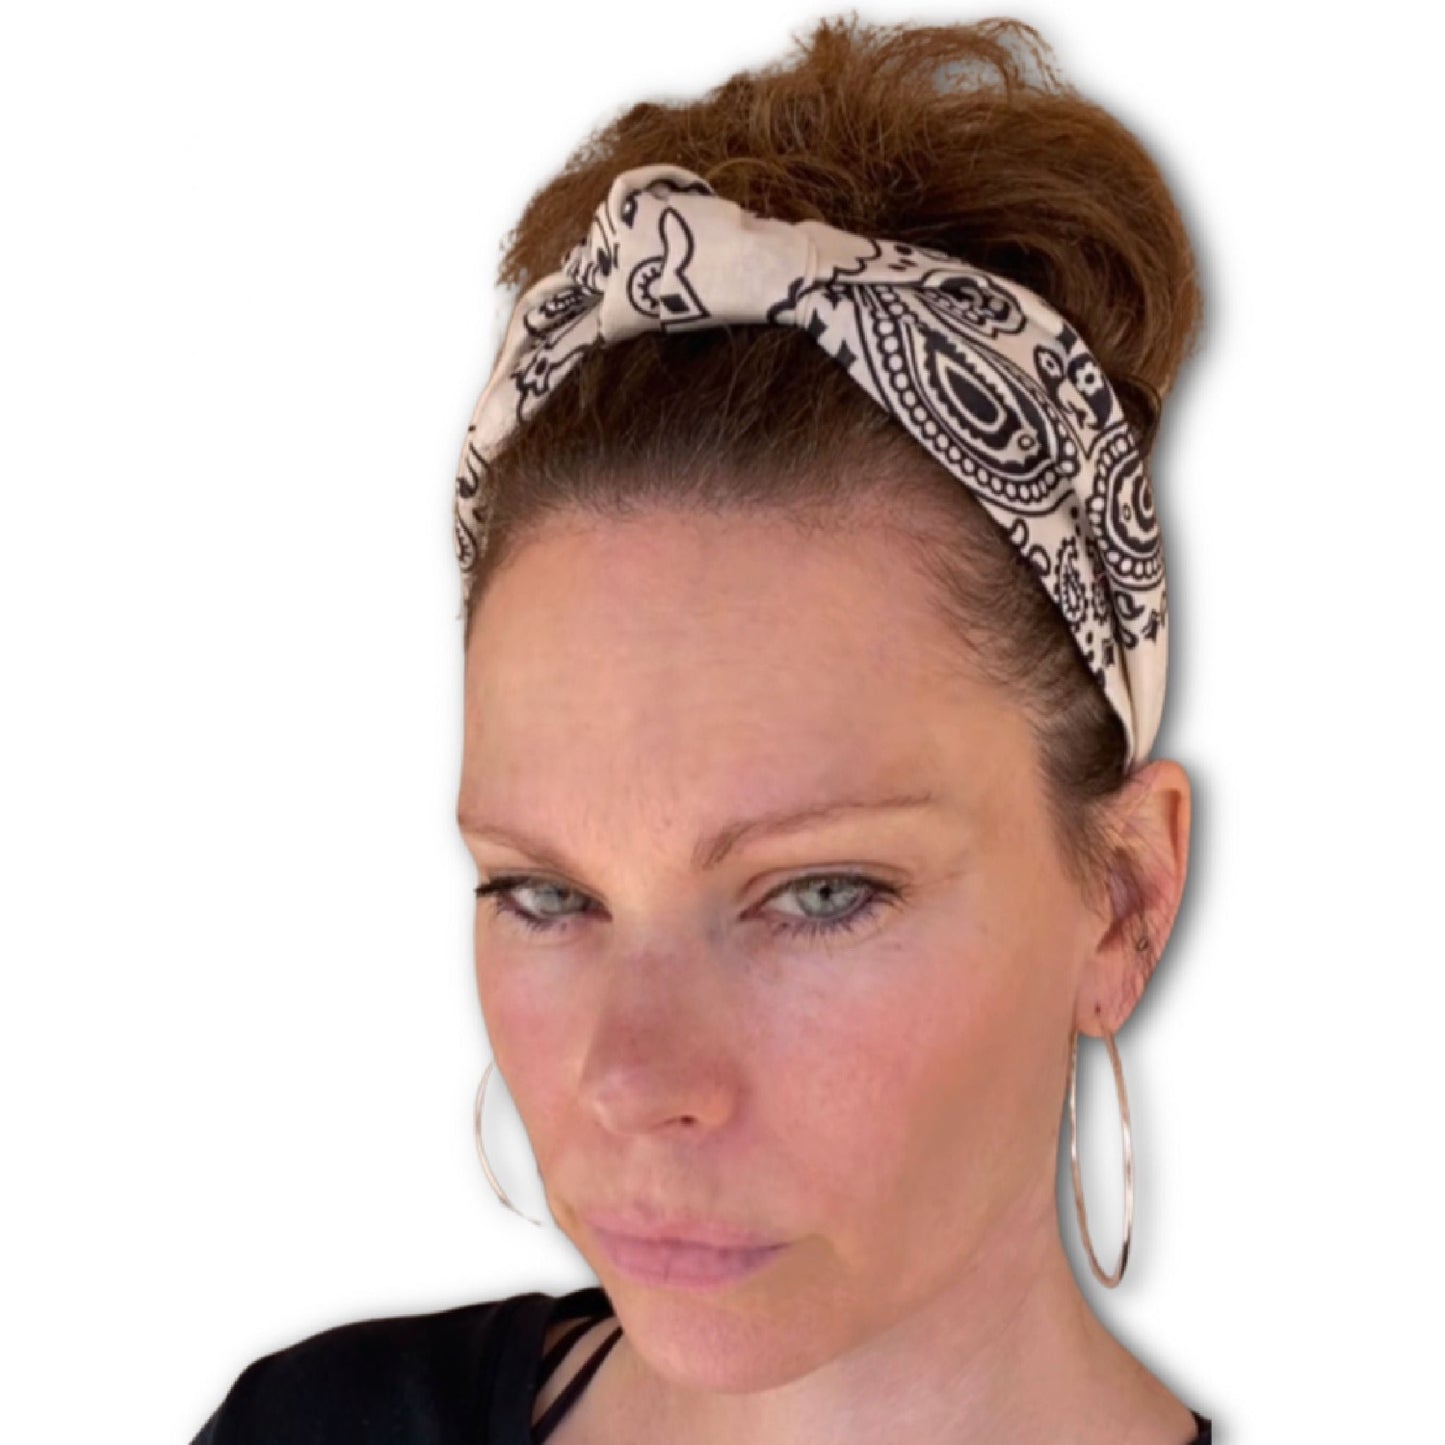 Model wearing beige colored paisley bandana headband that has the knot at the top.